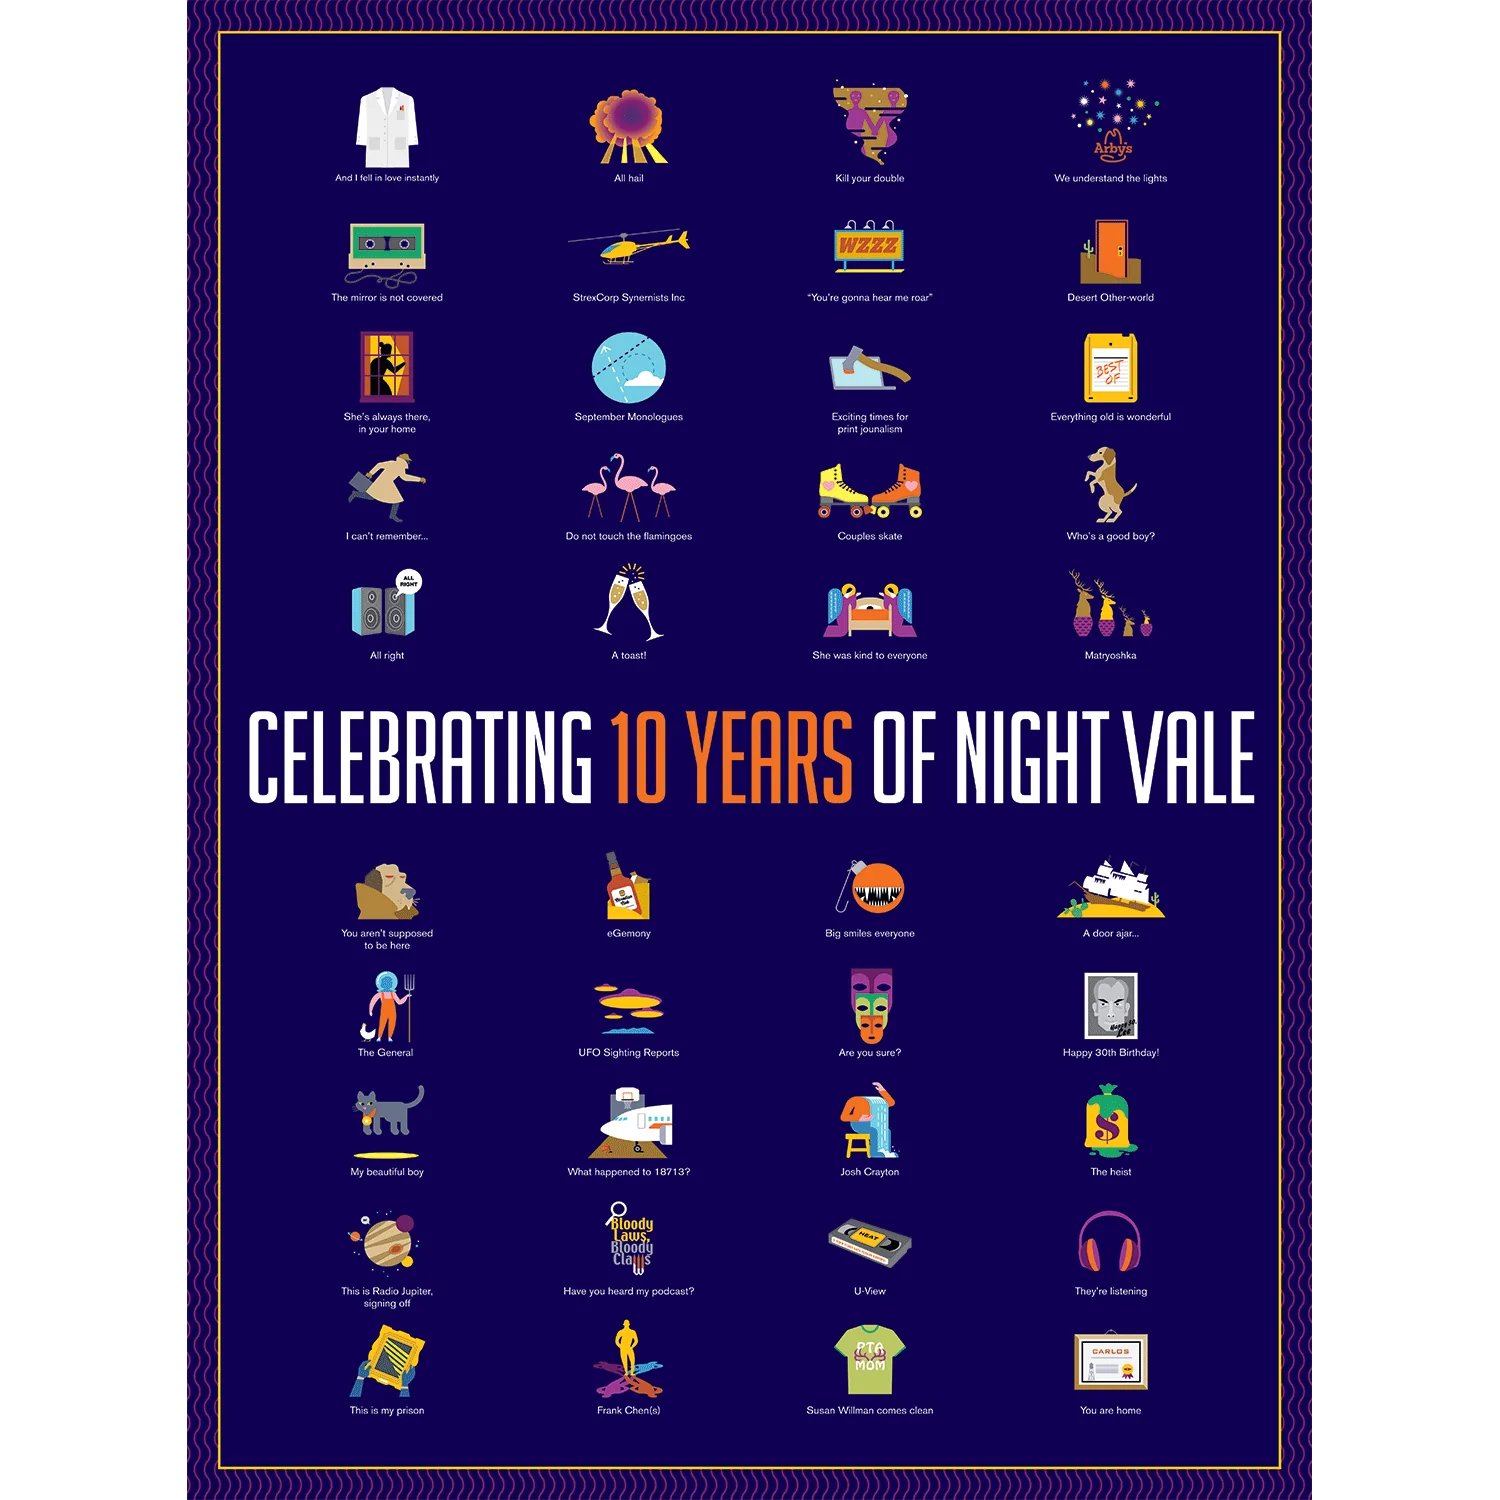 What Early "Night Vale" Can Teach Podcasting in 2022